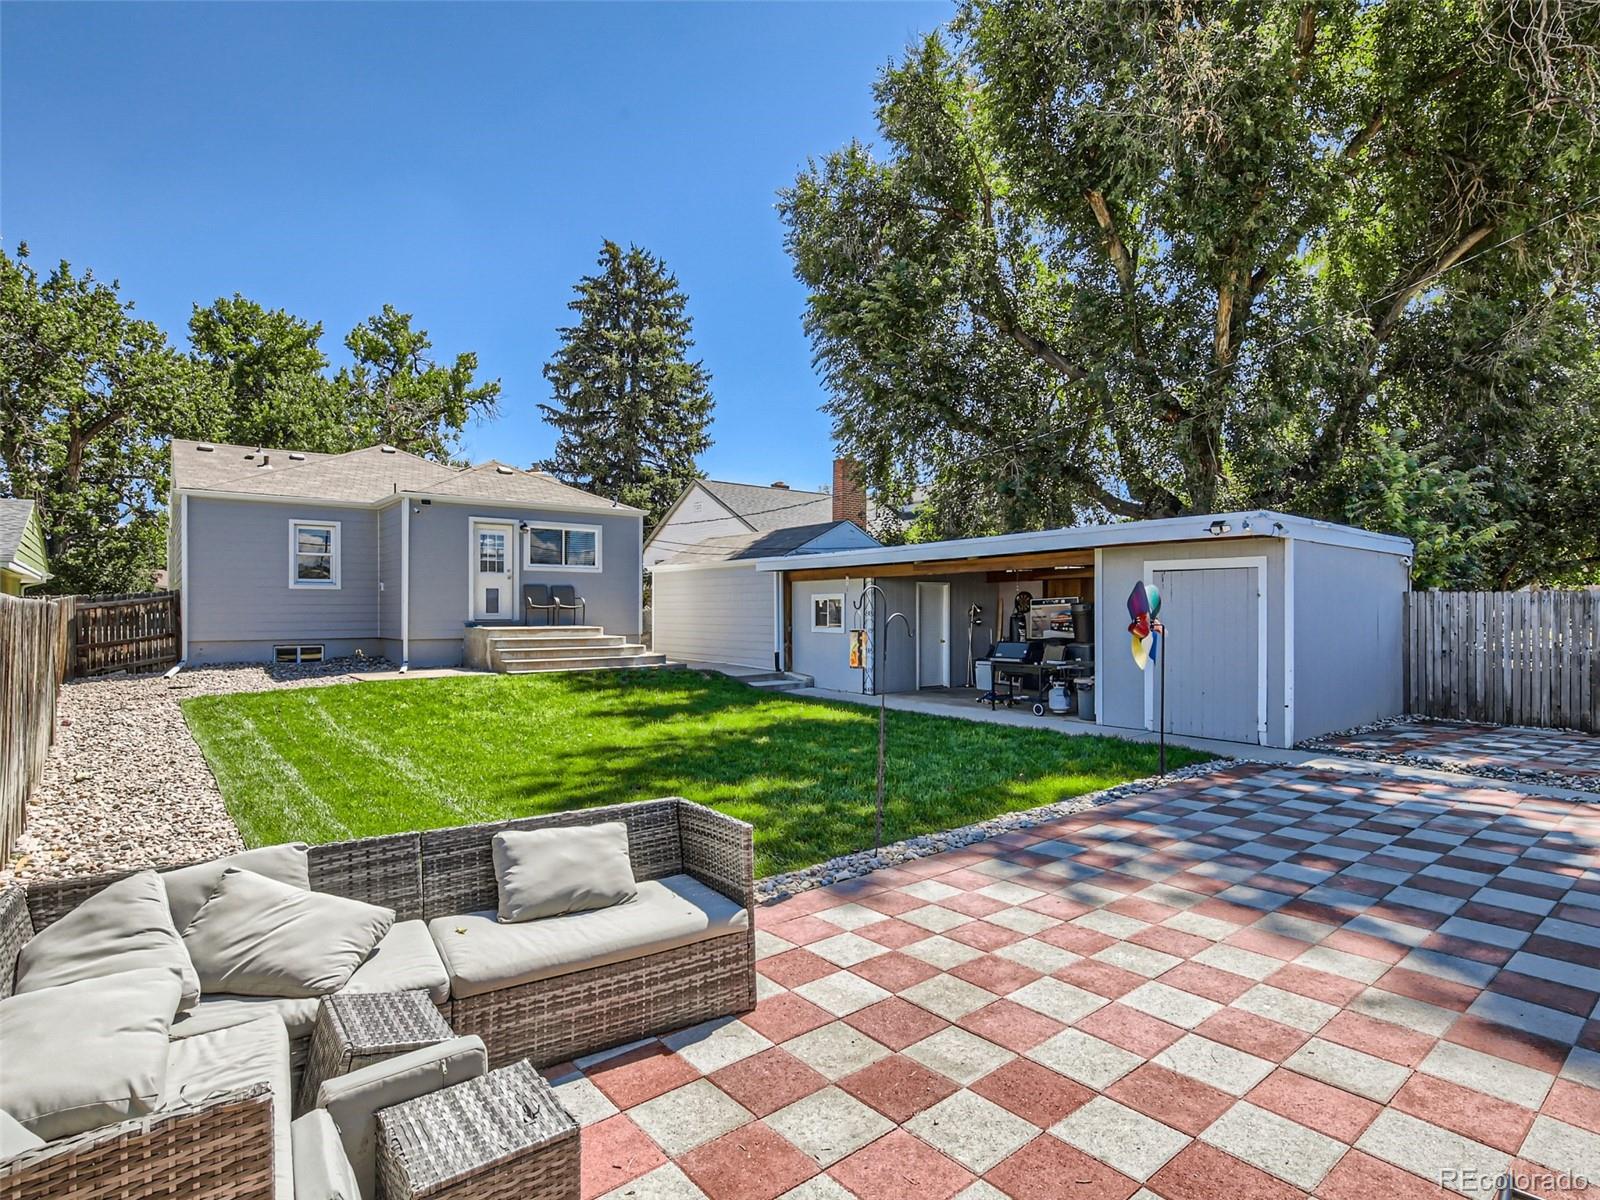 Report Image for 3811 S Clarkson Street,Englewood, Colorado